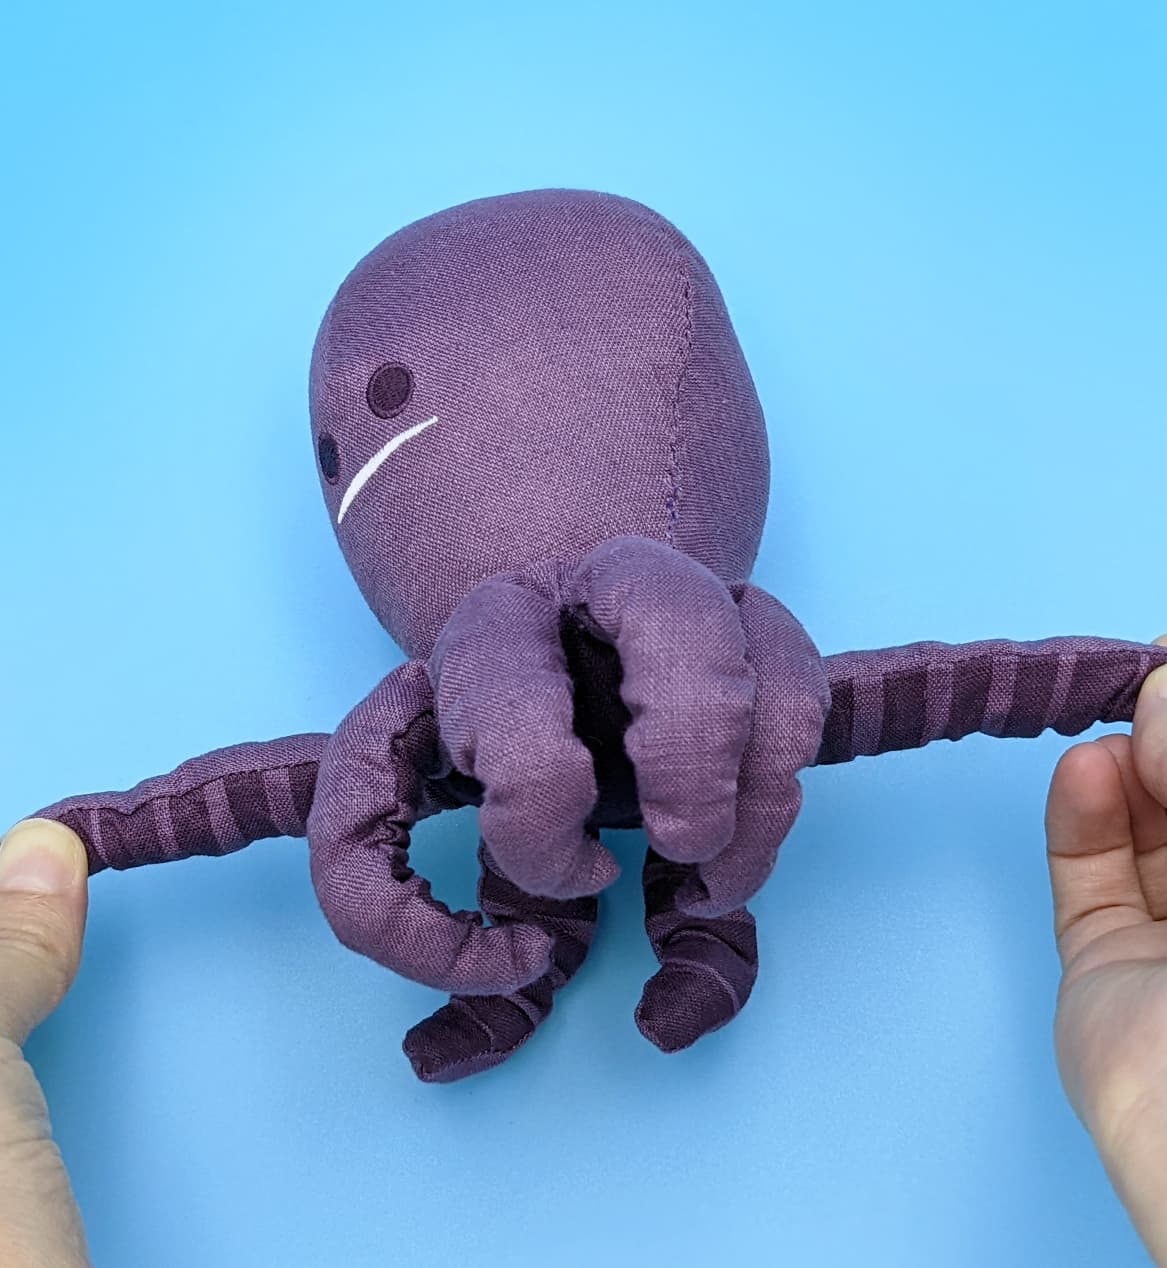 Octo - stretchy legs octopus with legs extended